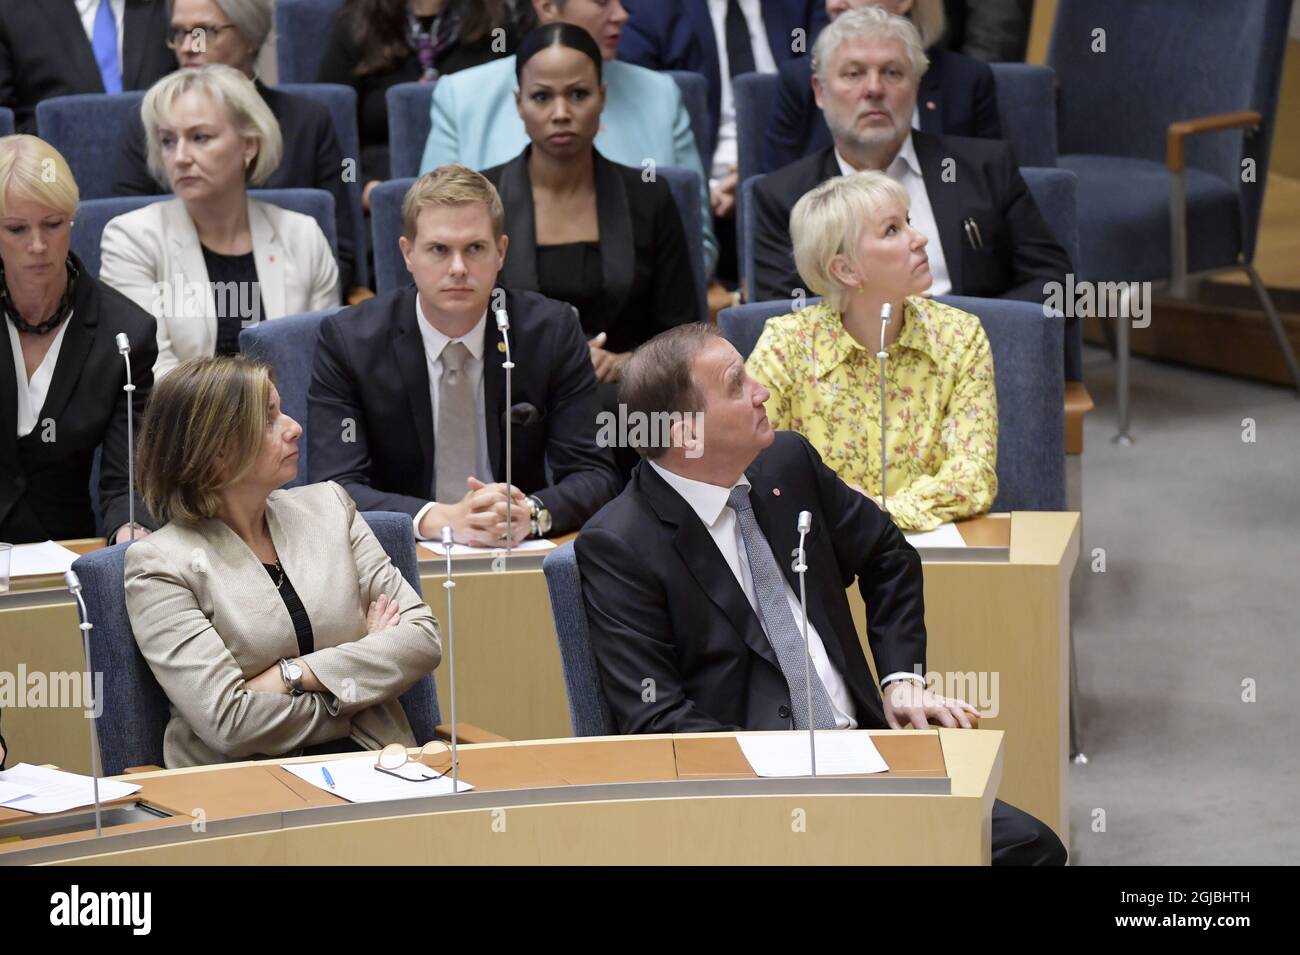 Swedish Prime Minister Stefan Lofven were ousted in no-confidence vote in the Swedish Parliament Riksdagen Tuesday 25 September. A total of 204 of Sweden's 349 members of parliament voted no to Lofven as prime minister. Seated next to Lovfen in deputy Prime Minister Isabella Lovin. Photo: Anders Wiklund / TT kod 10040  Stock Photo